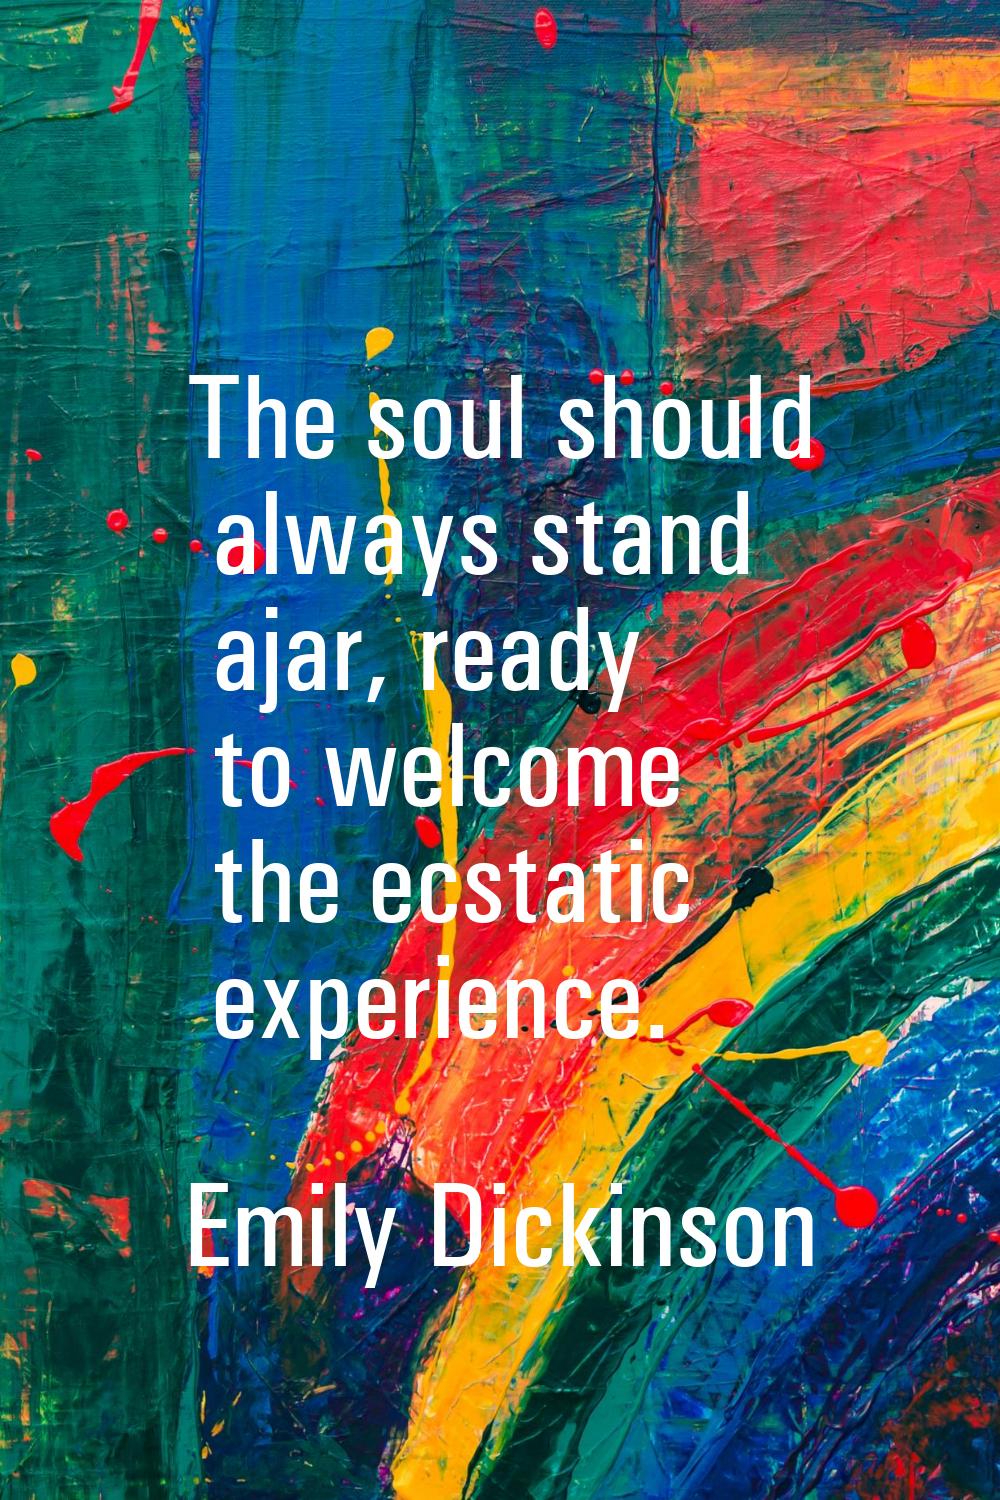 The soul should always stand ajar, ready to welcome the ecstatic experience.